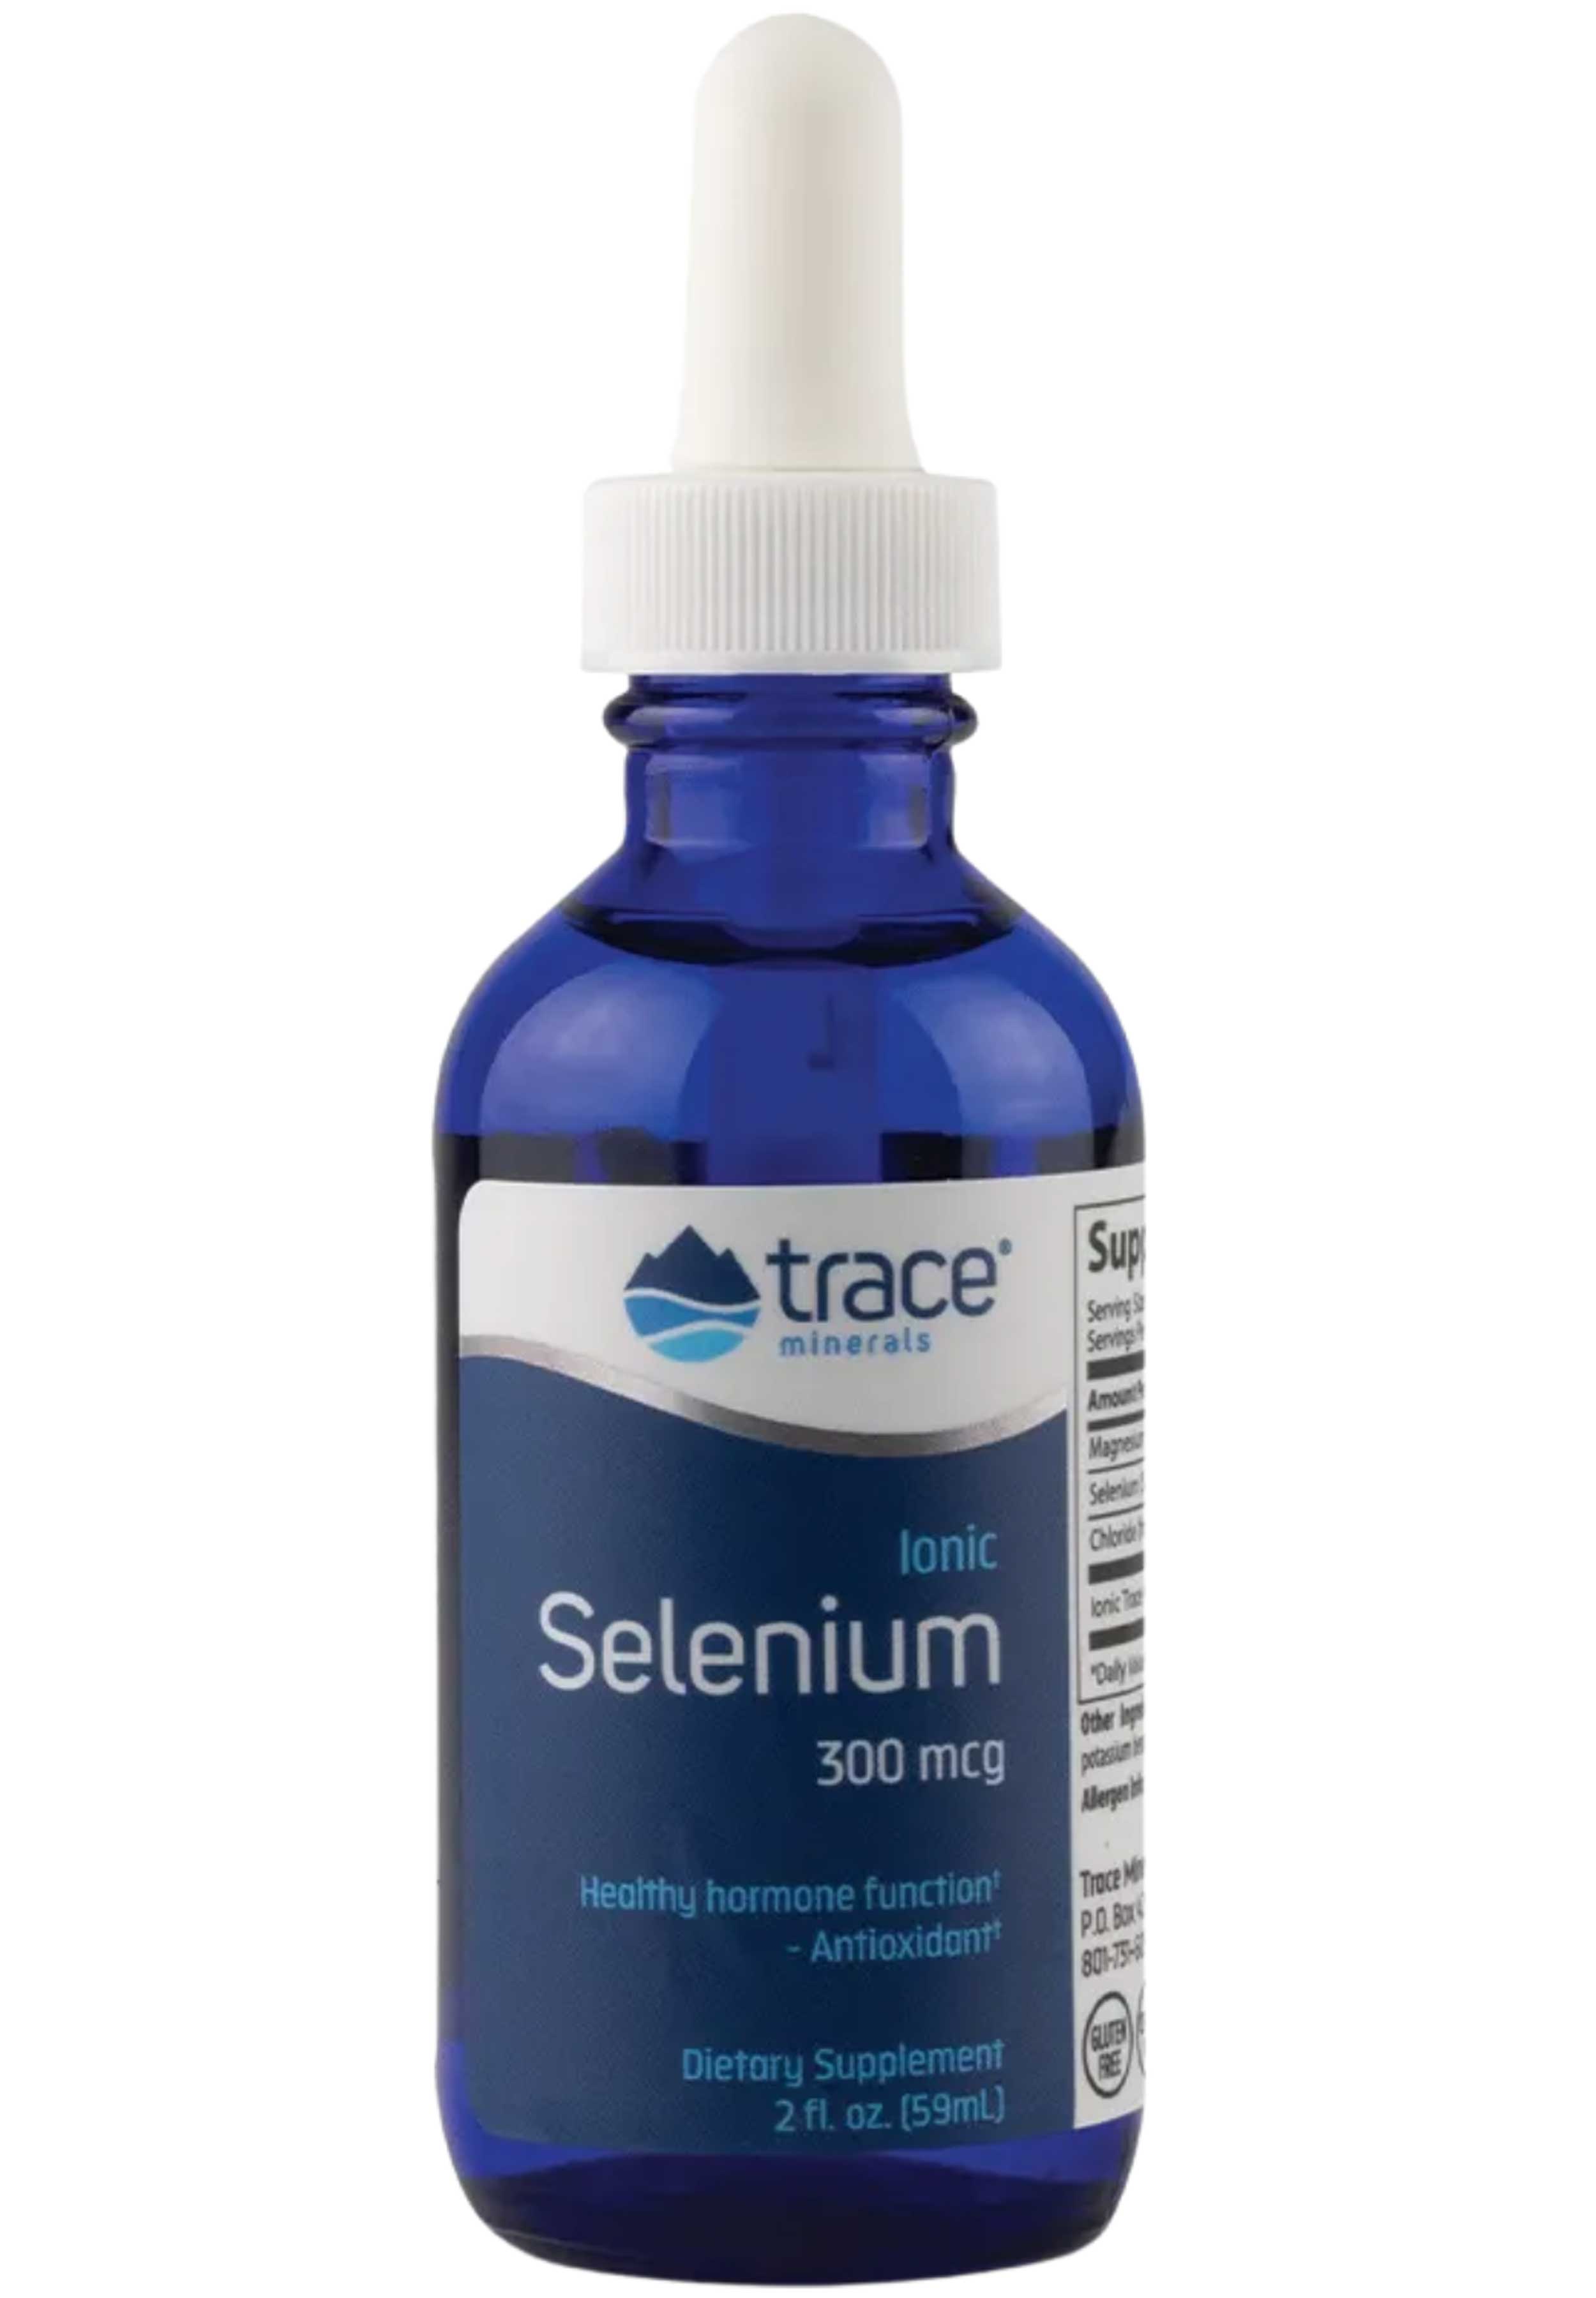 Trace Minerals Research Ionic Selenium